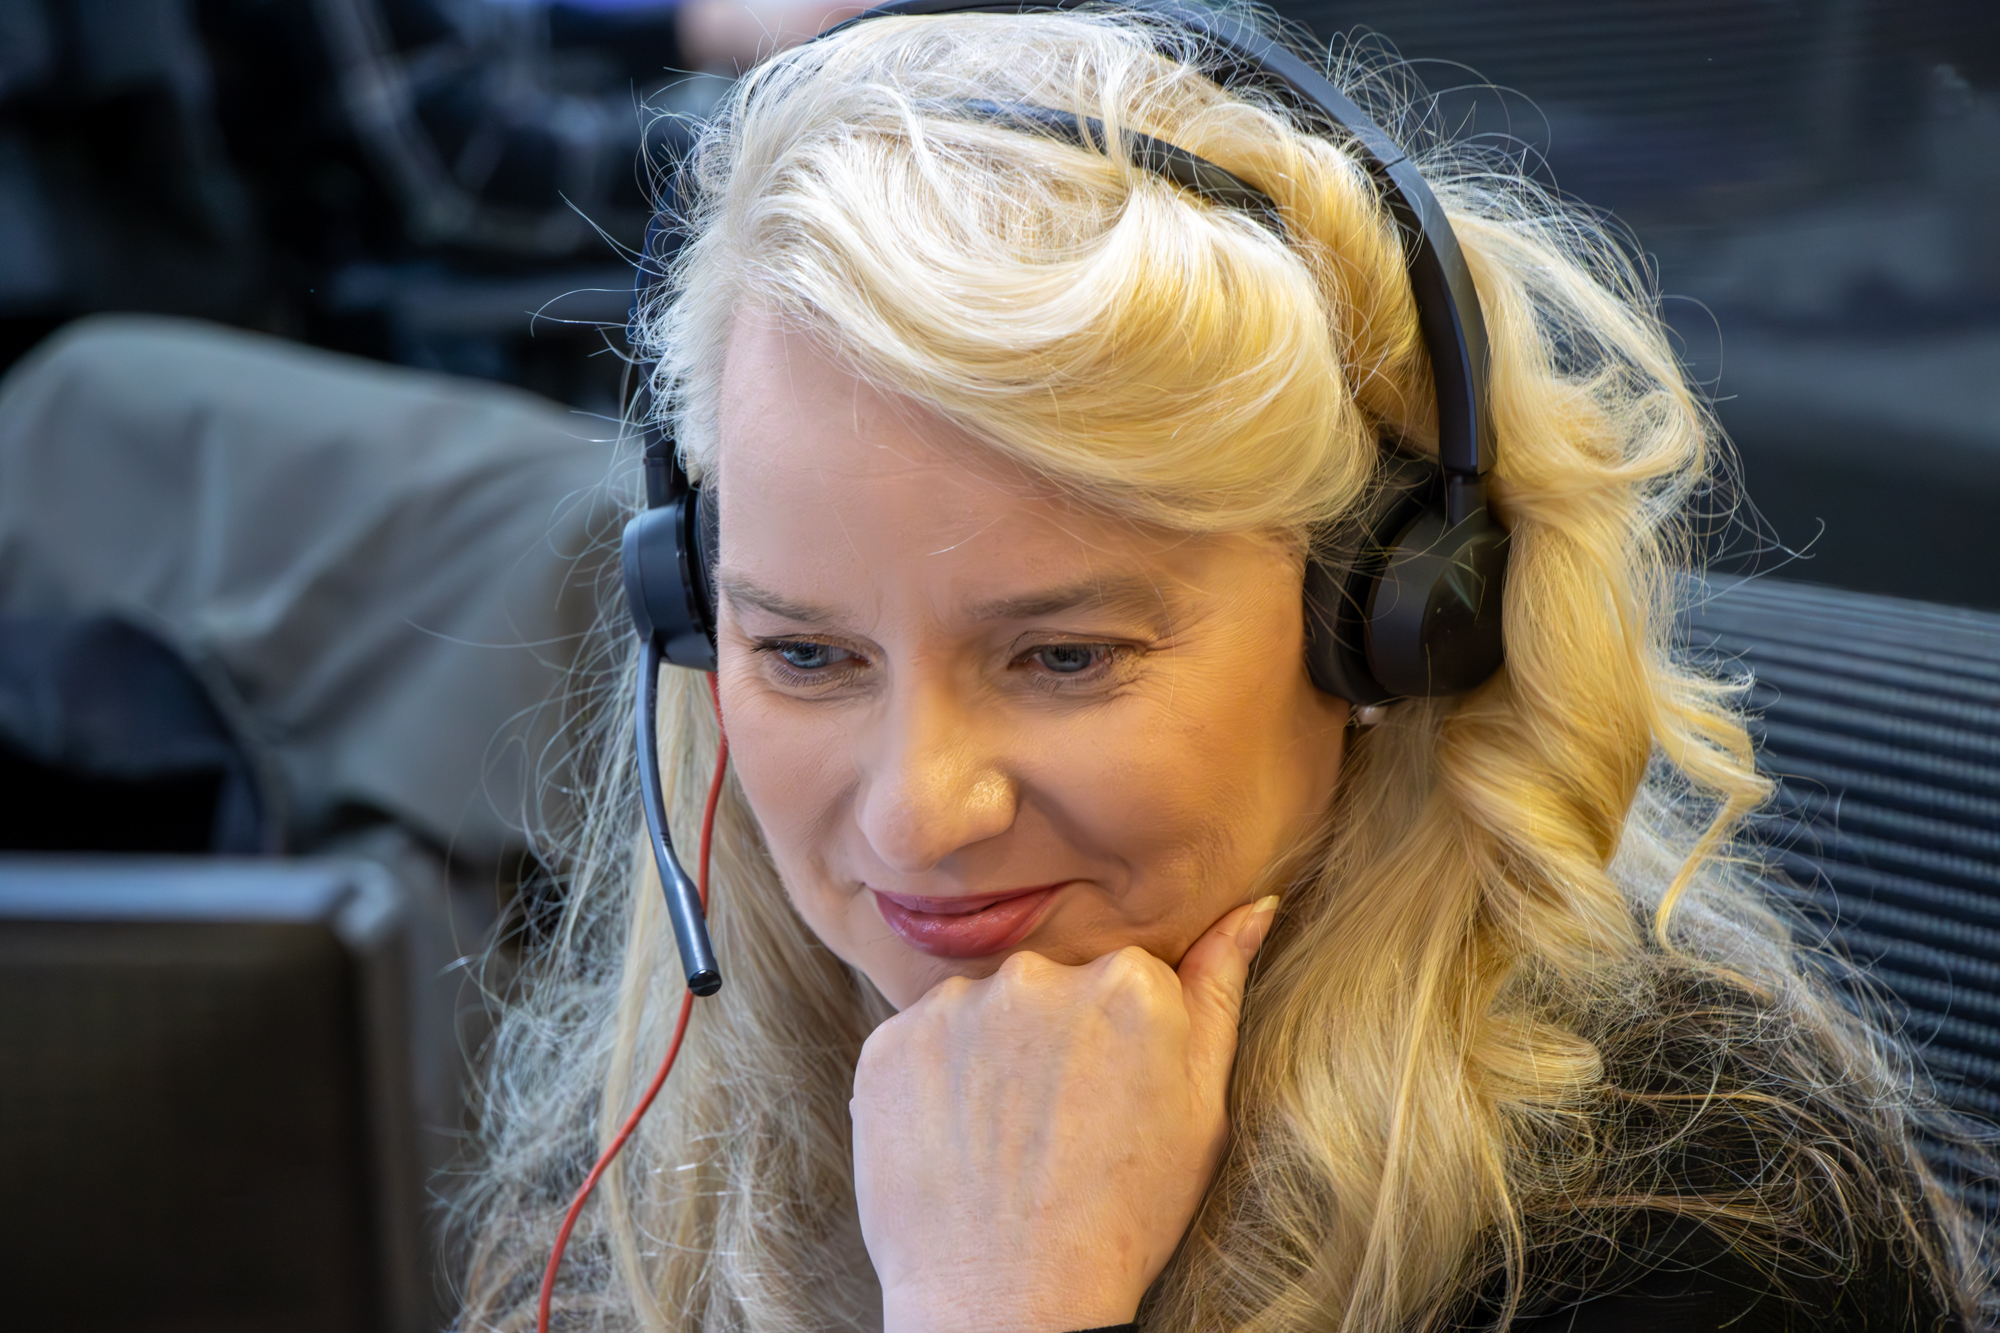 Novuna National E-Commerce Manager, Elaine Keith, speaking to a customer on a headset